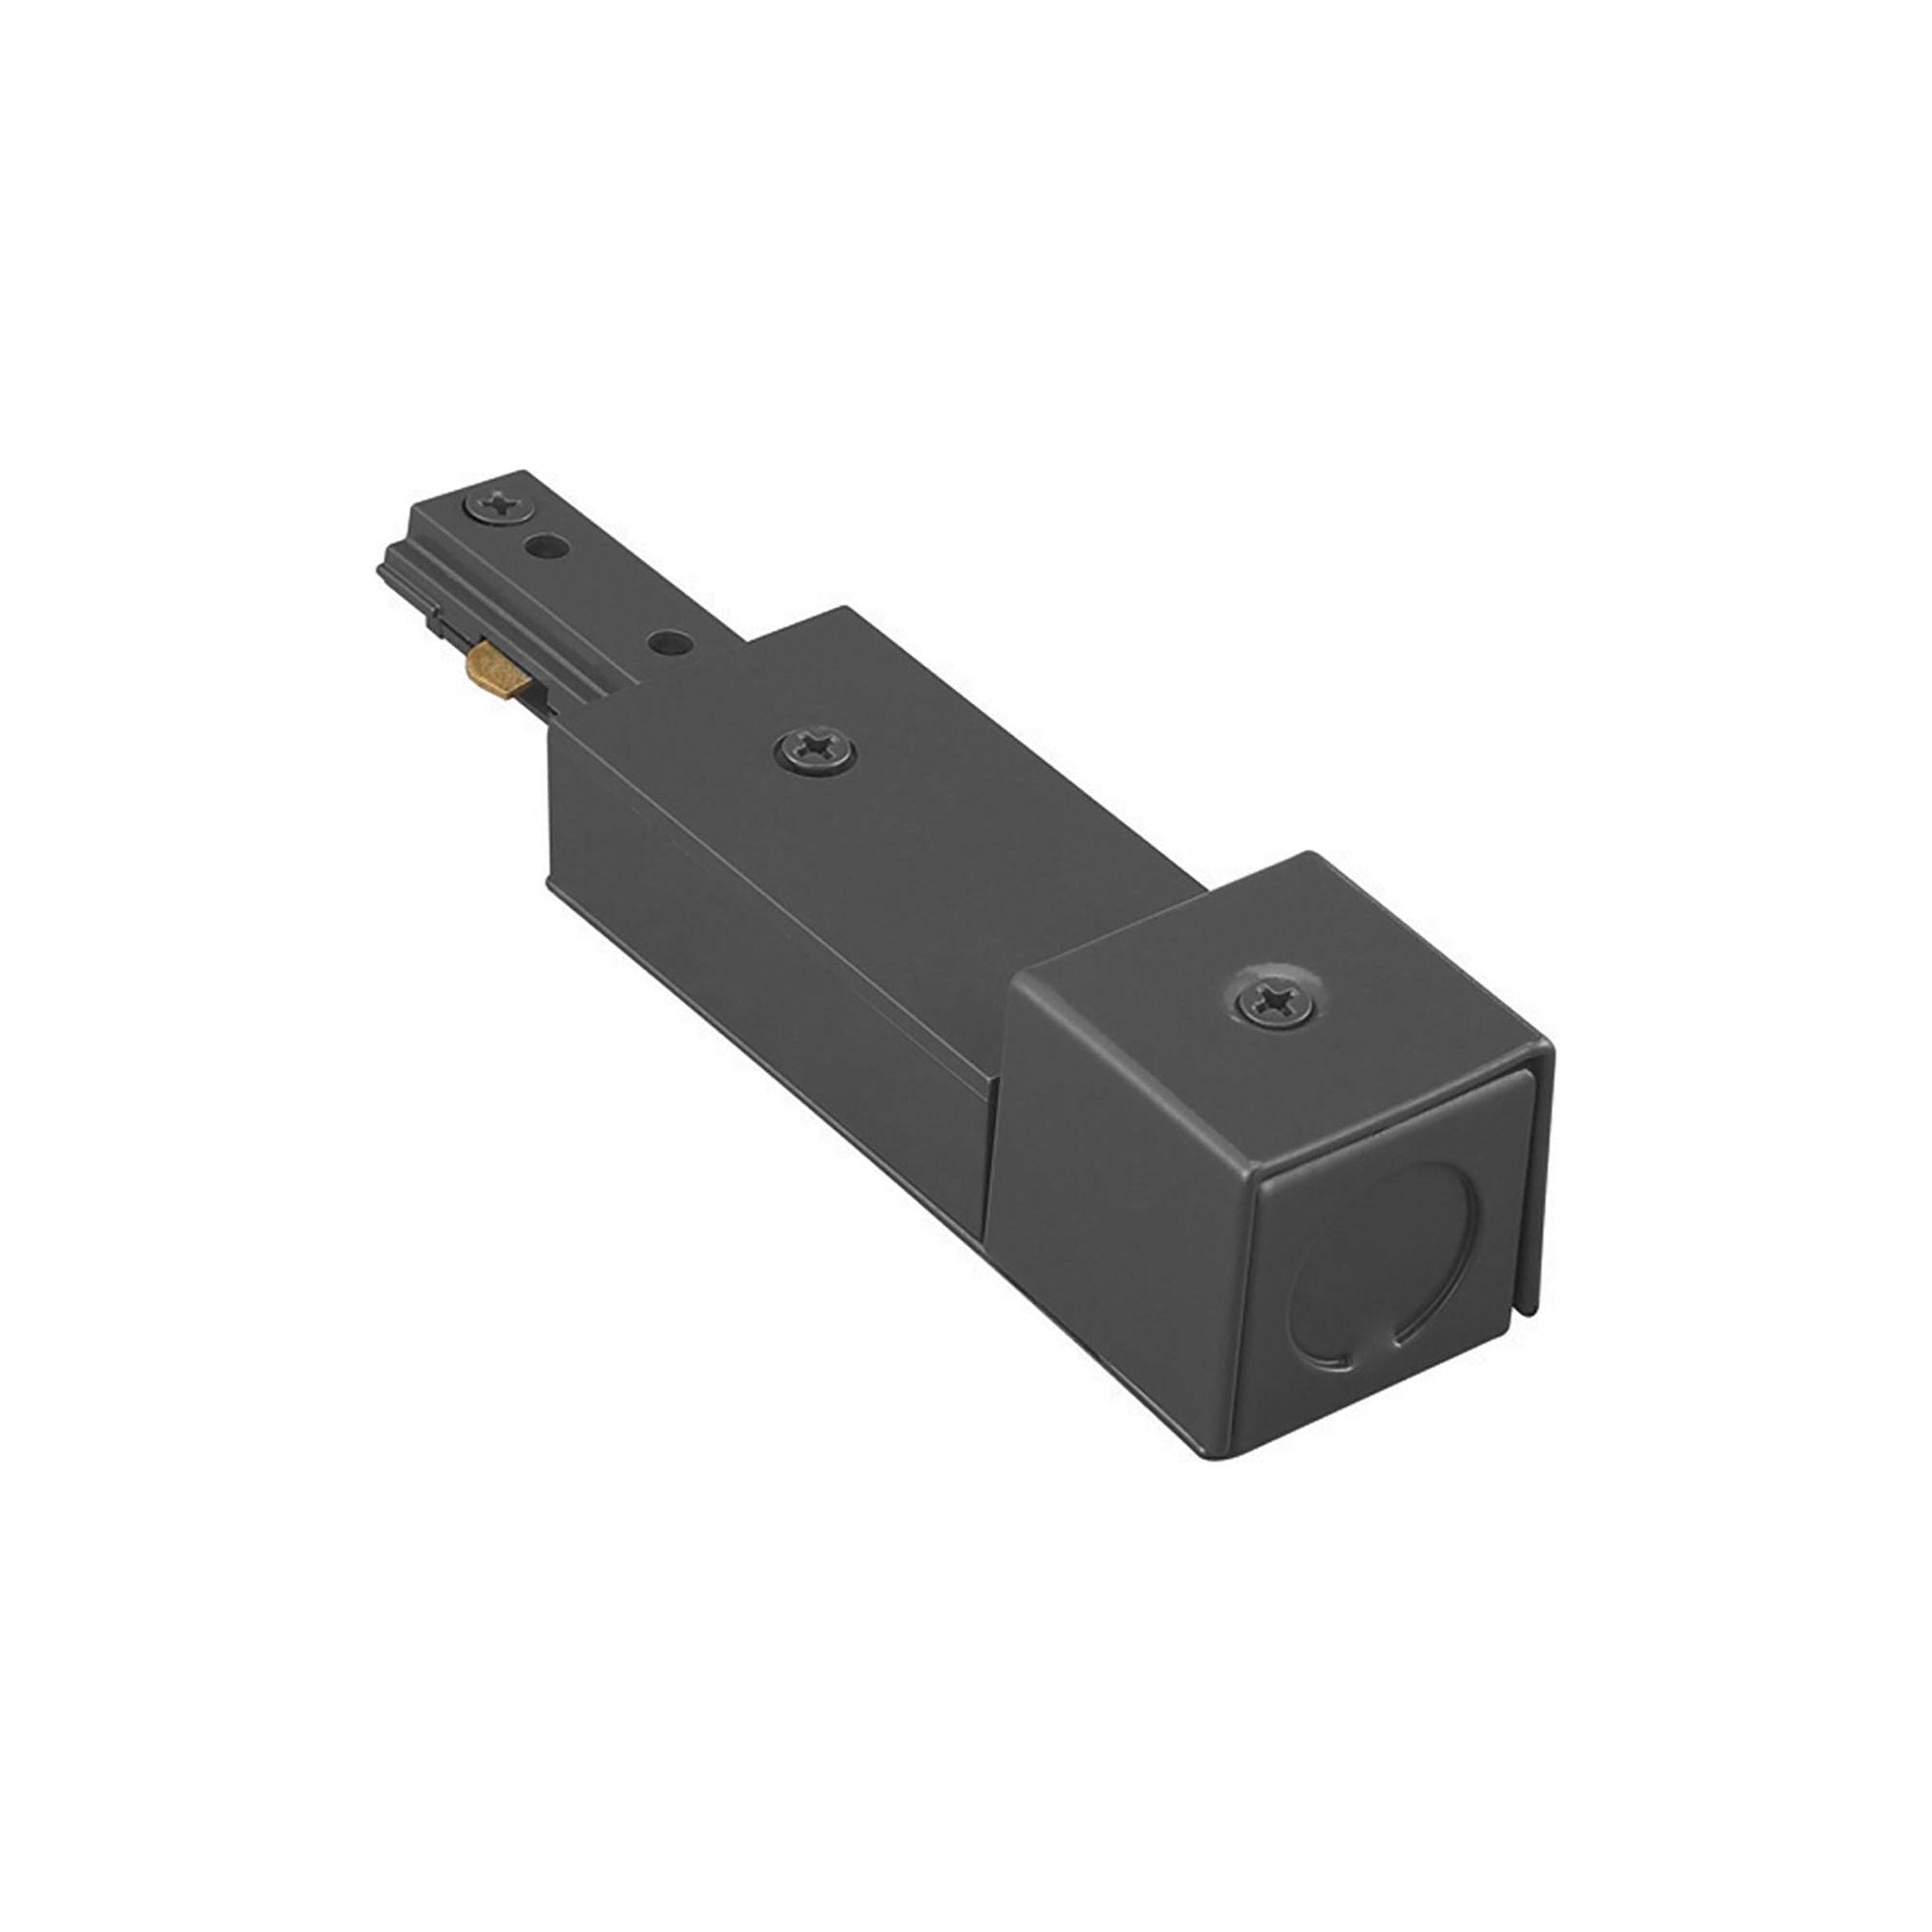 WAC Lighting - H Track Live End BX Connector - Lights Canada